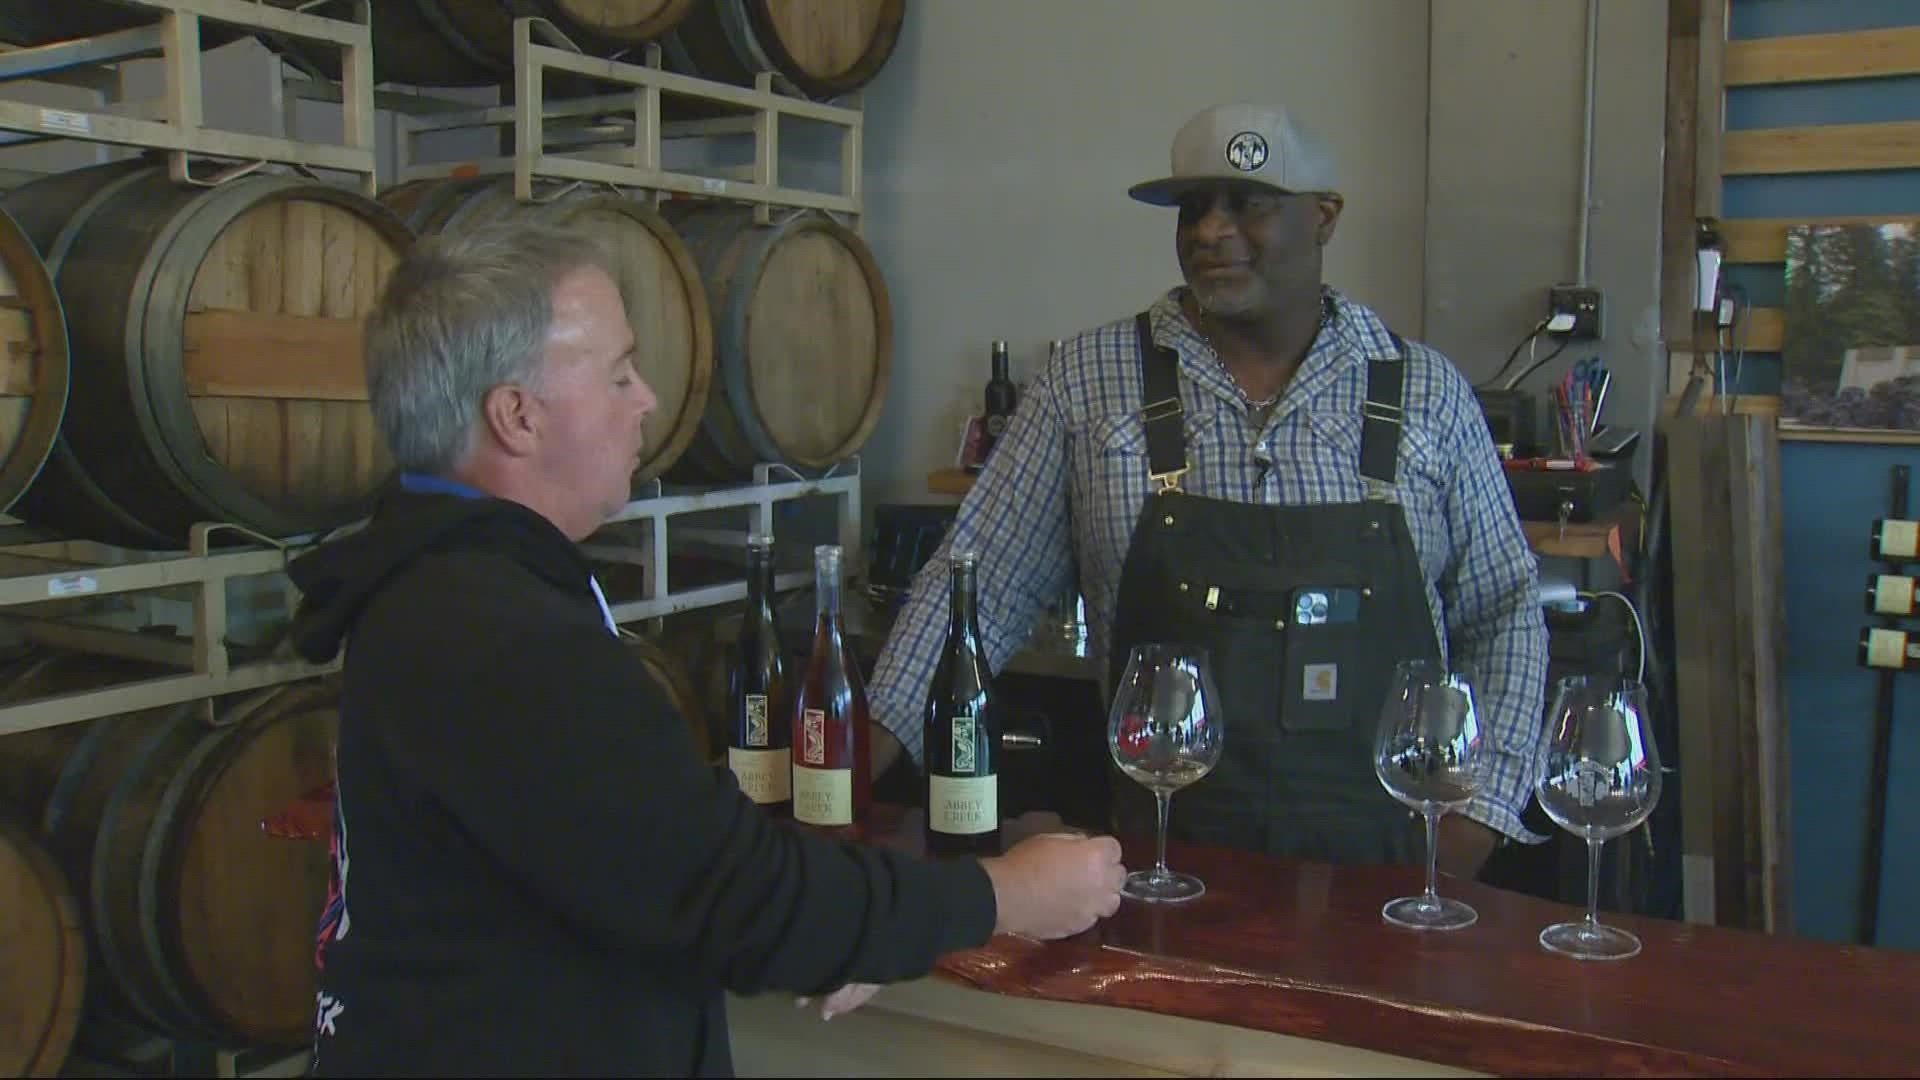 Bertony Faustin, the owner of Abbey Creek Winery in North Plains, is all about using wine to bring people together.